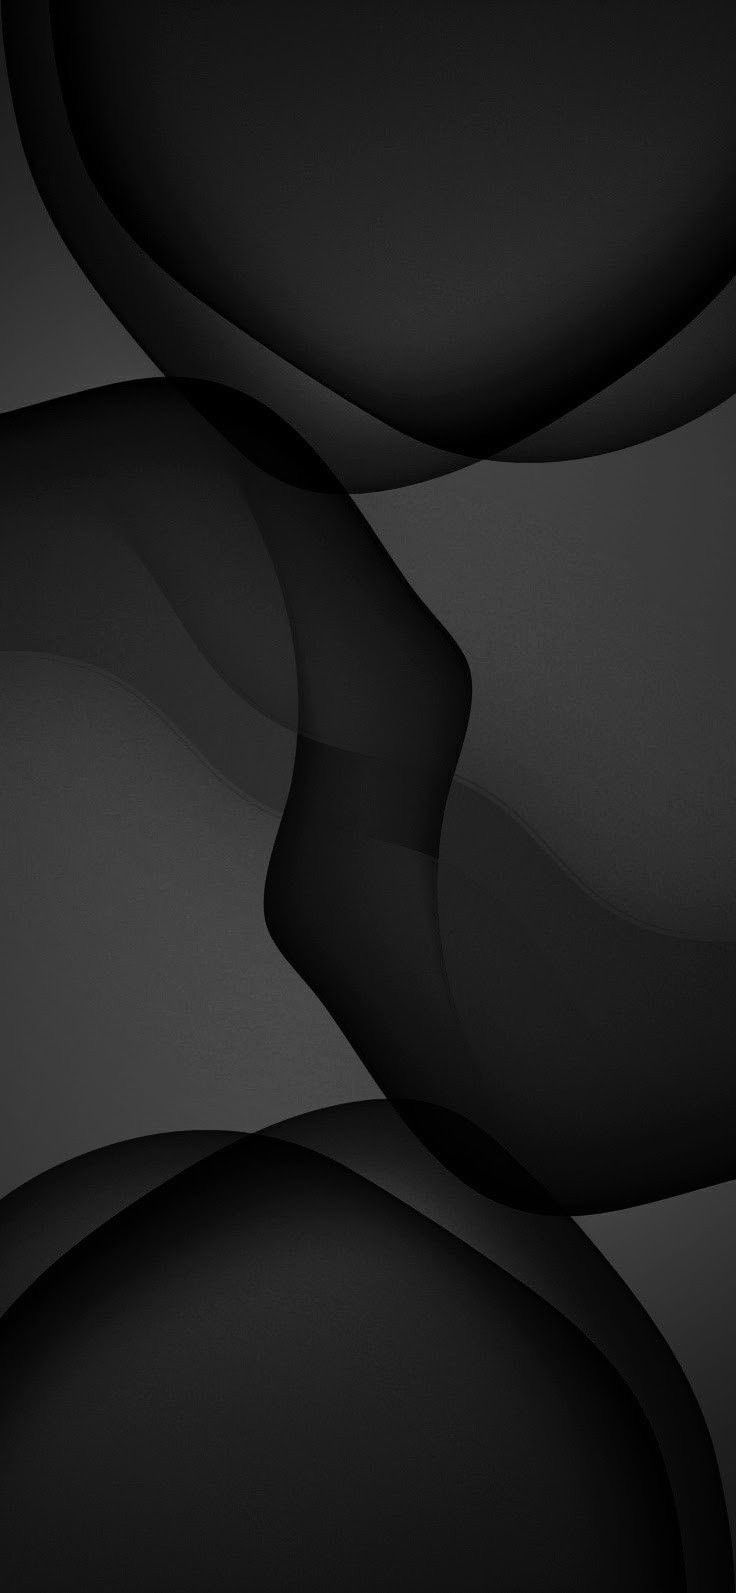 an abstract black and white background with curves